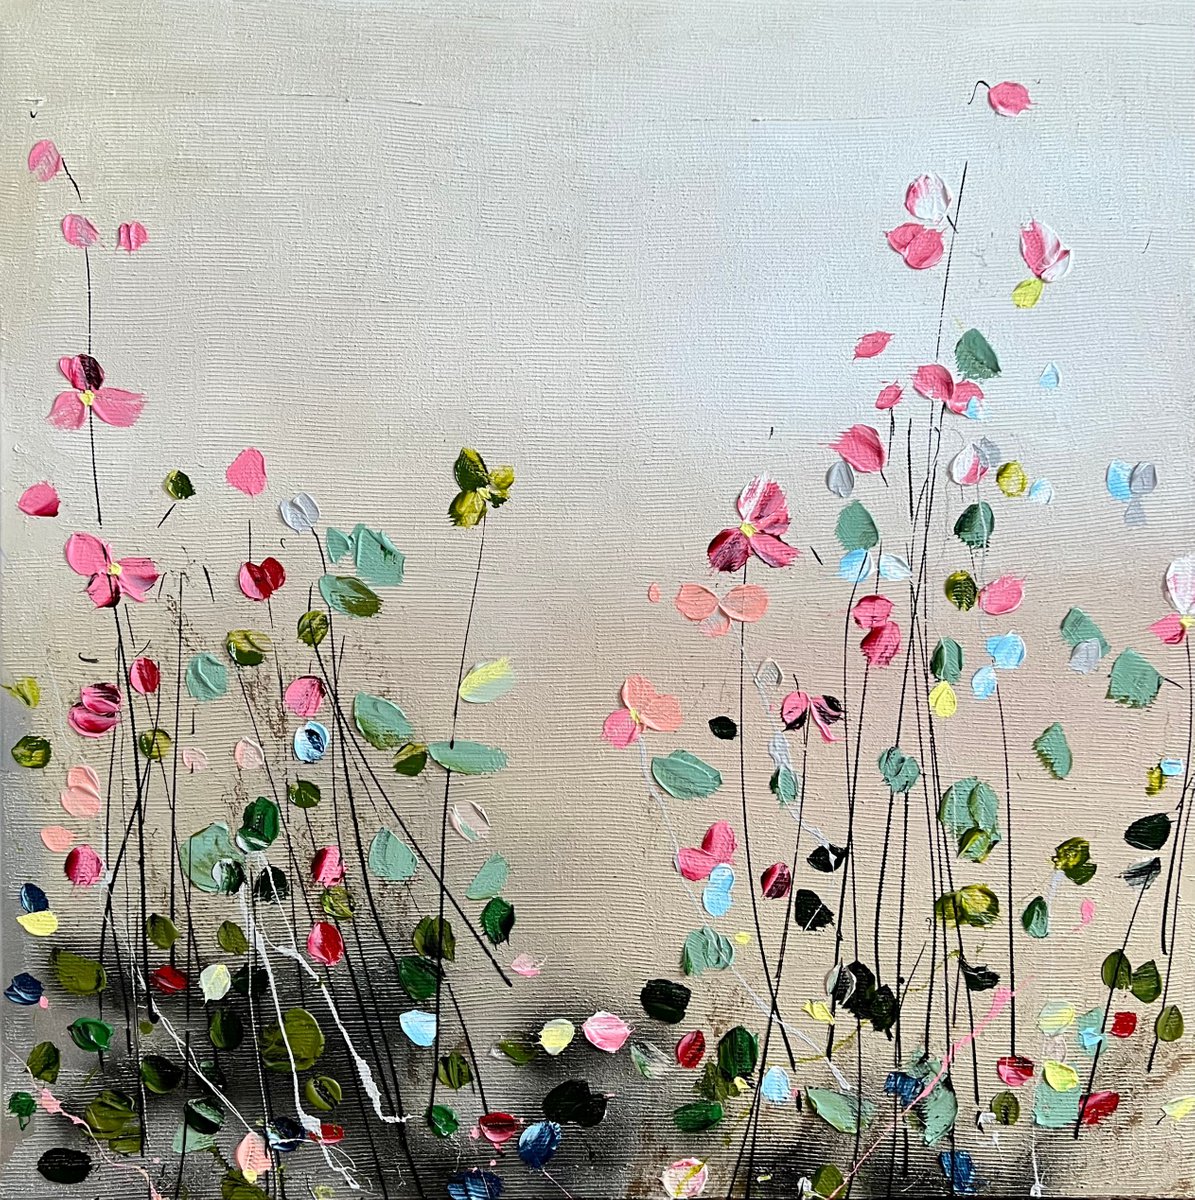 Square acrylic painting with flowers - Flowers In The Morning - � 90x90cm by Anastassia Skopp